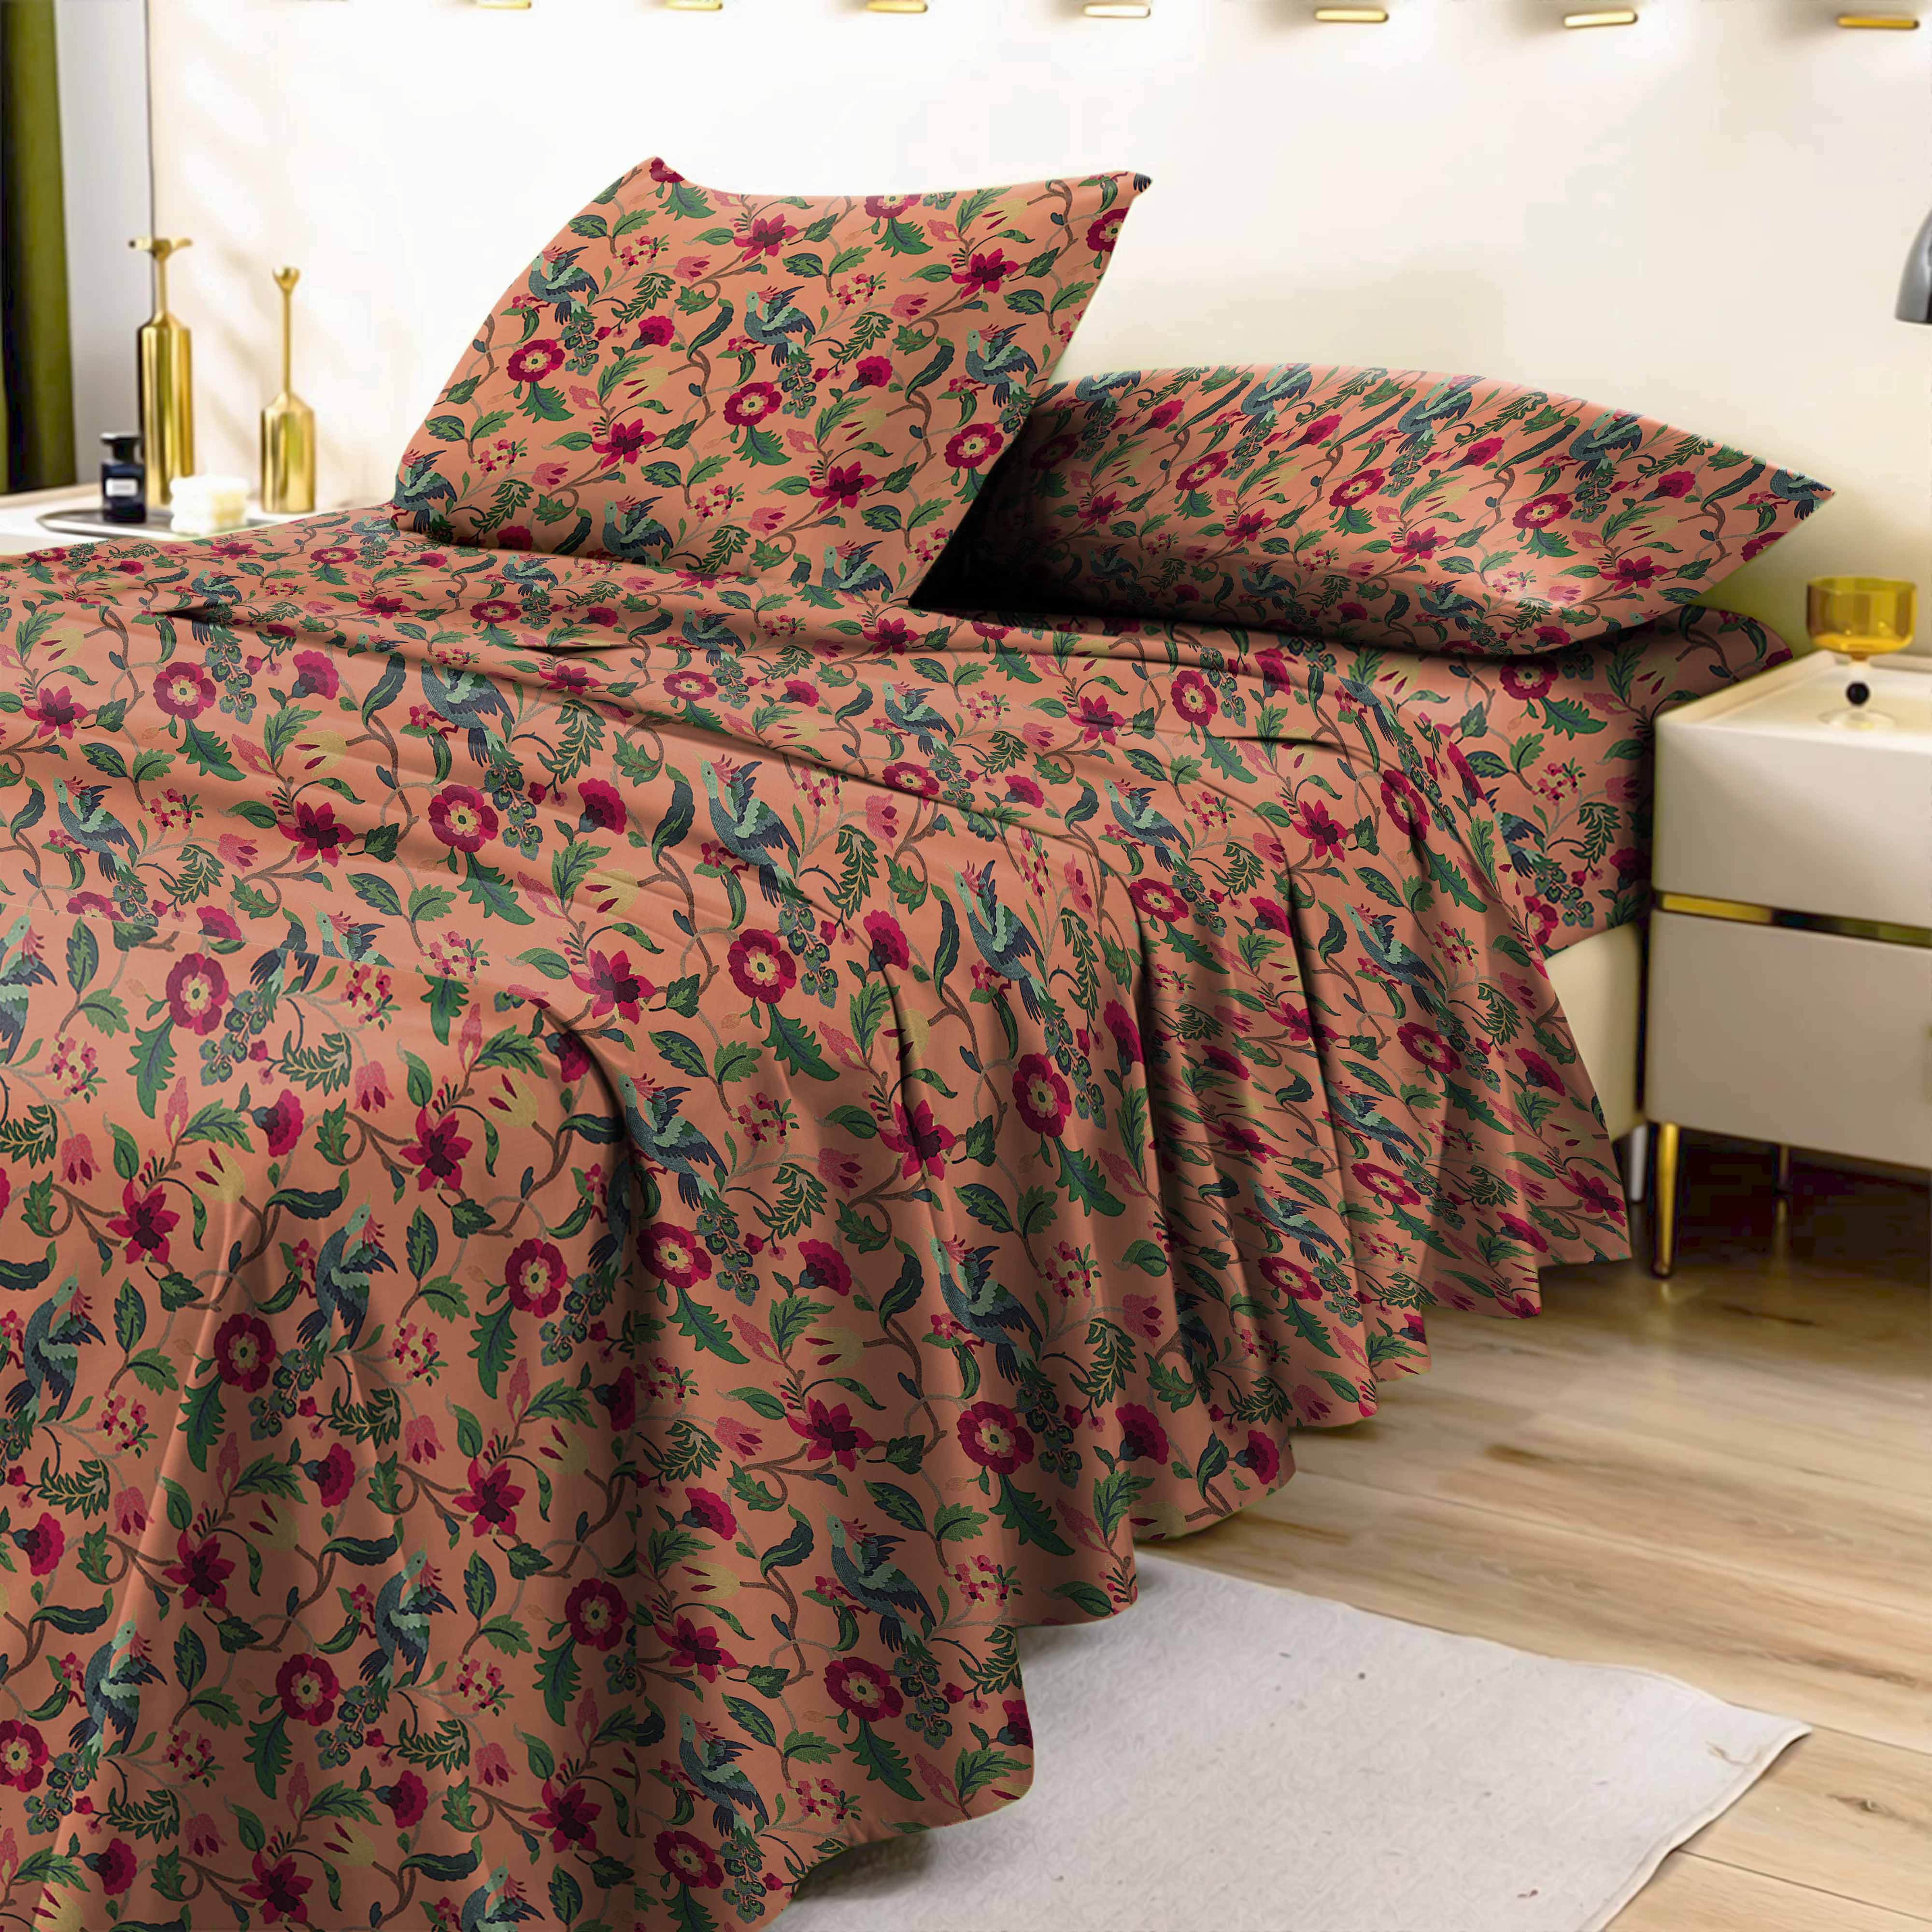 Cabal Peach Bedcover for Double Bed with 2 PillowCovers King Size (104" X 90")